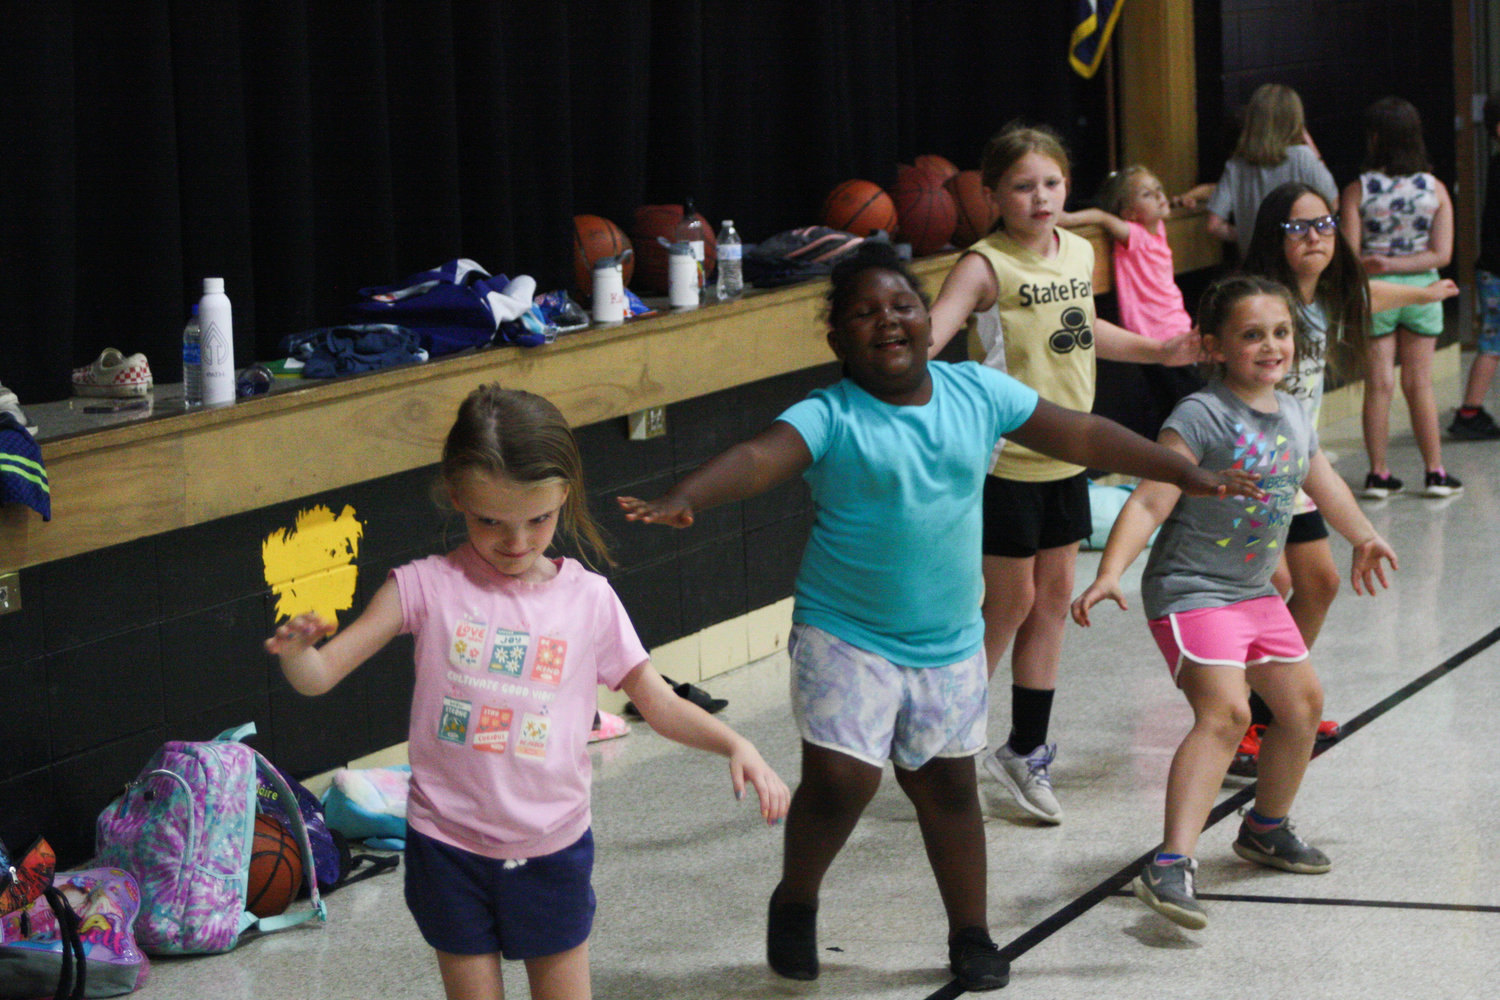 Campers work on their footwork June 3 at the Van-Far Lady Indians basketball camp at Van-Far Elementary School in Vandalia. A total of 27 children in first- through eighth-grade learned basketball fundamentals May 31-June 3 at the elementary school and high school.